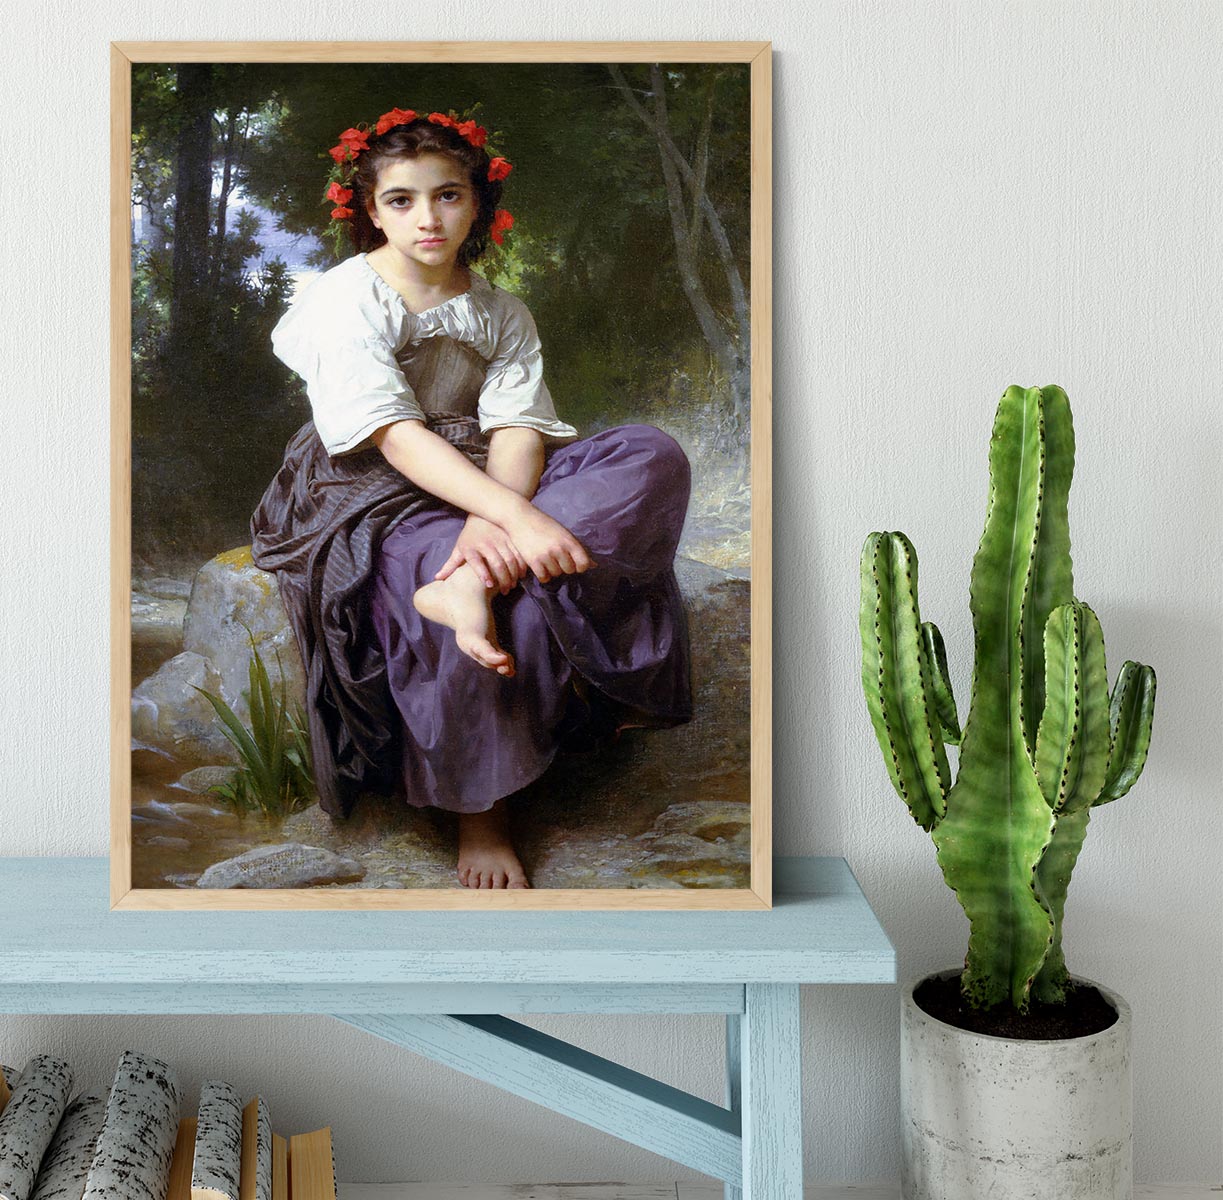 At the Edge of the Brook 2 By Bouguereau Framed Print - Canvas Art Rocks - 4